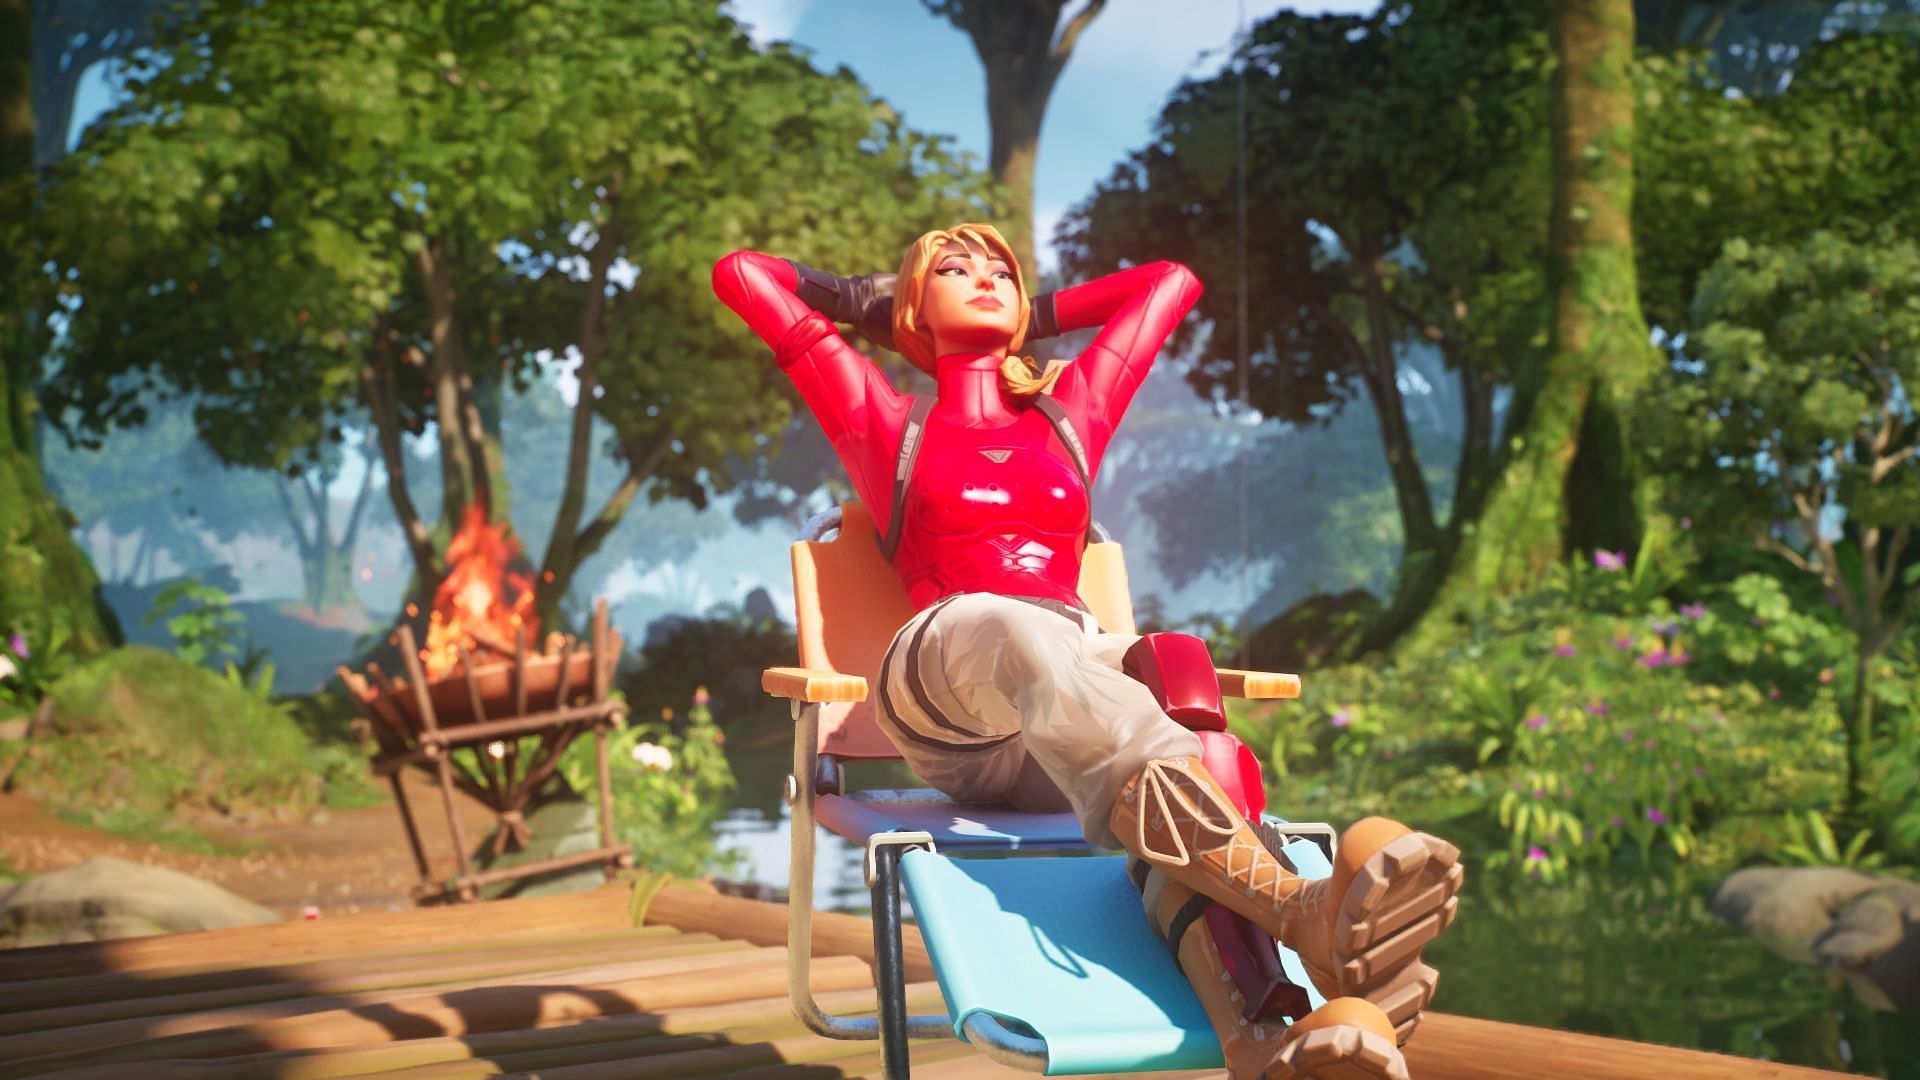 Summer Escape Event will be the highlight of the Fortnite update v25.11 (Image via Twitter/QueenDarkieReal)